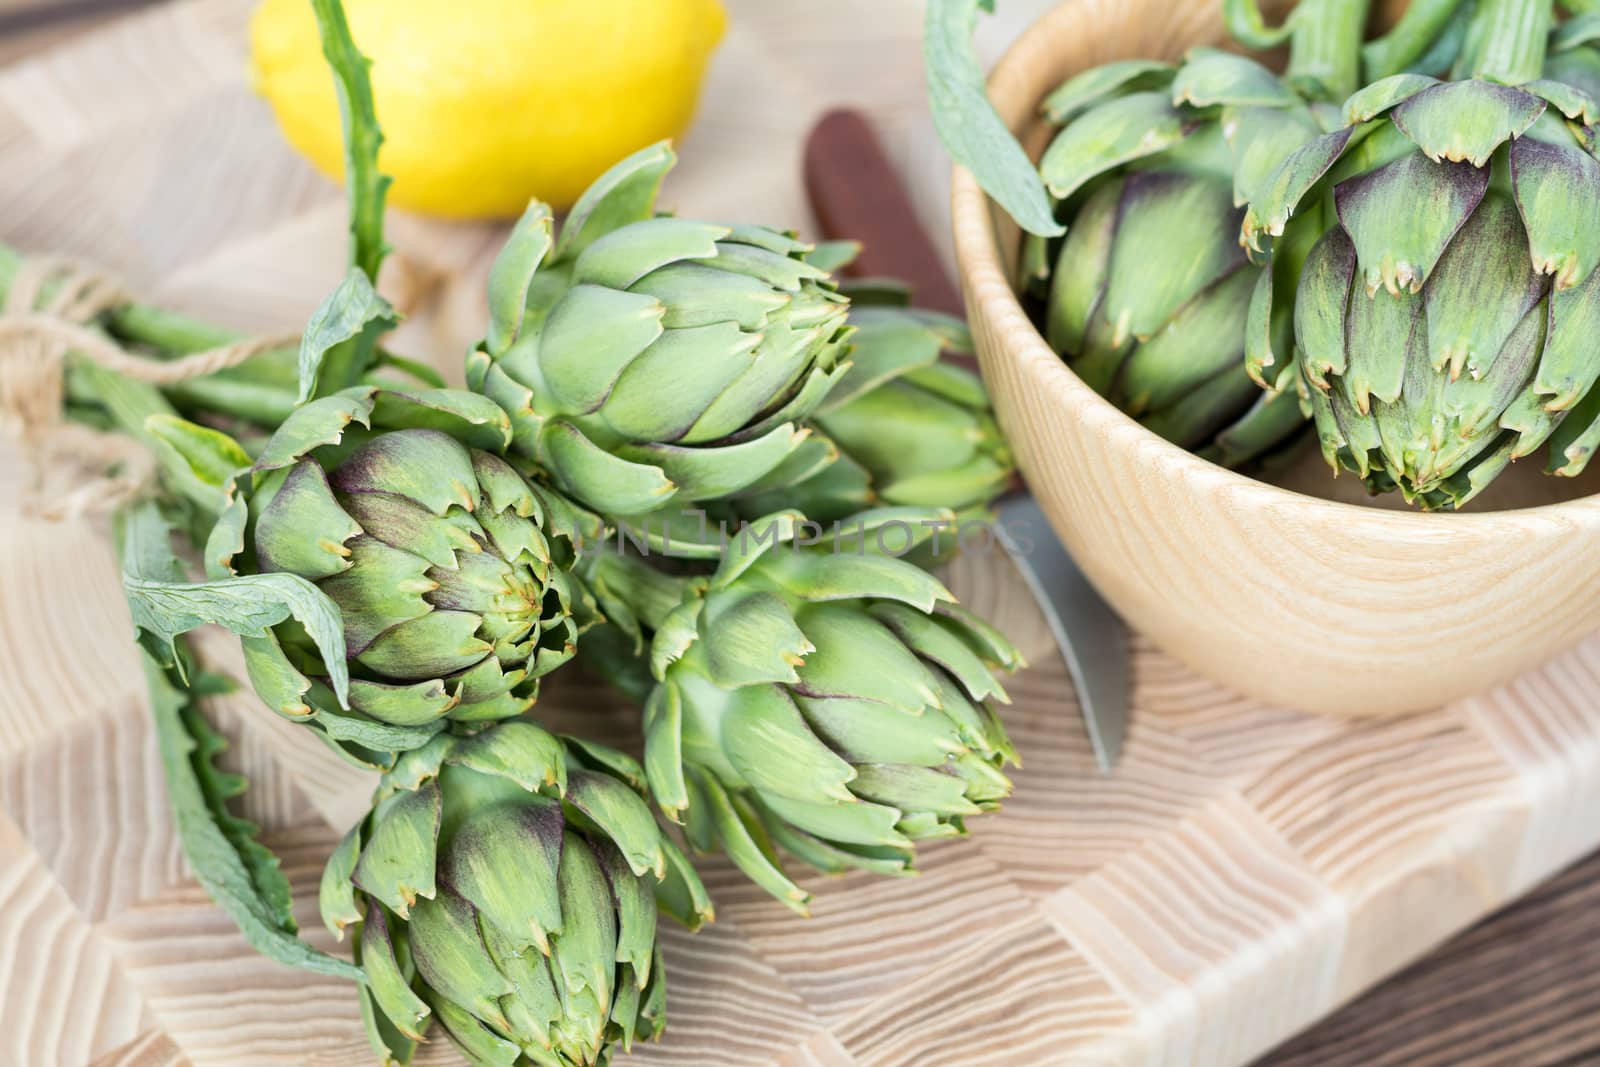 Two artichoke bouquets on kitchen table among some kitchen items. Top view.